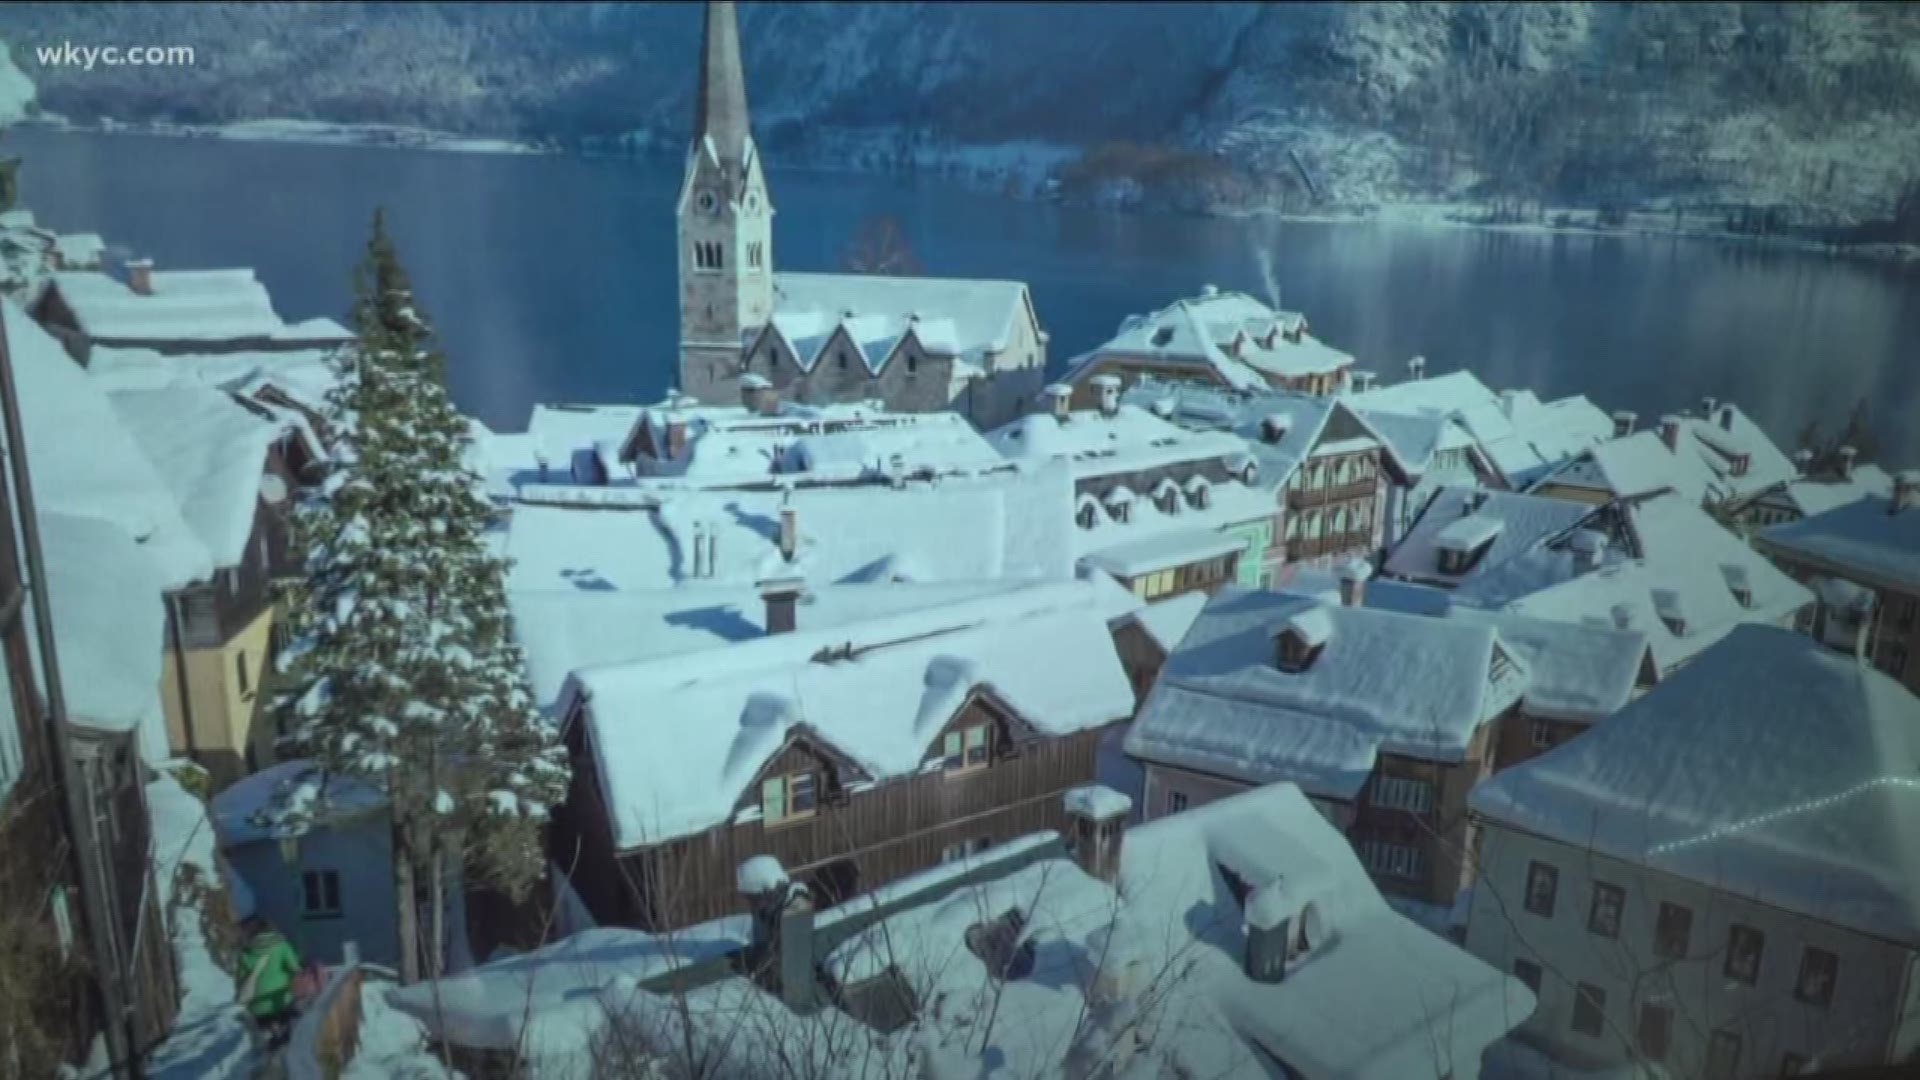 Jan. 8, 2020: The small village in Austria is reportedly getting as many as 10,000 visitors per day.